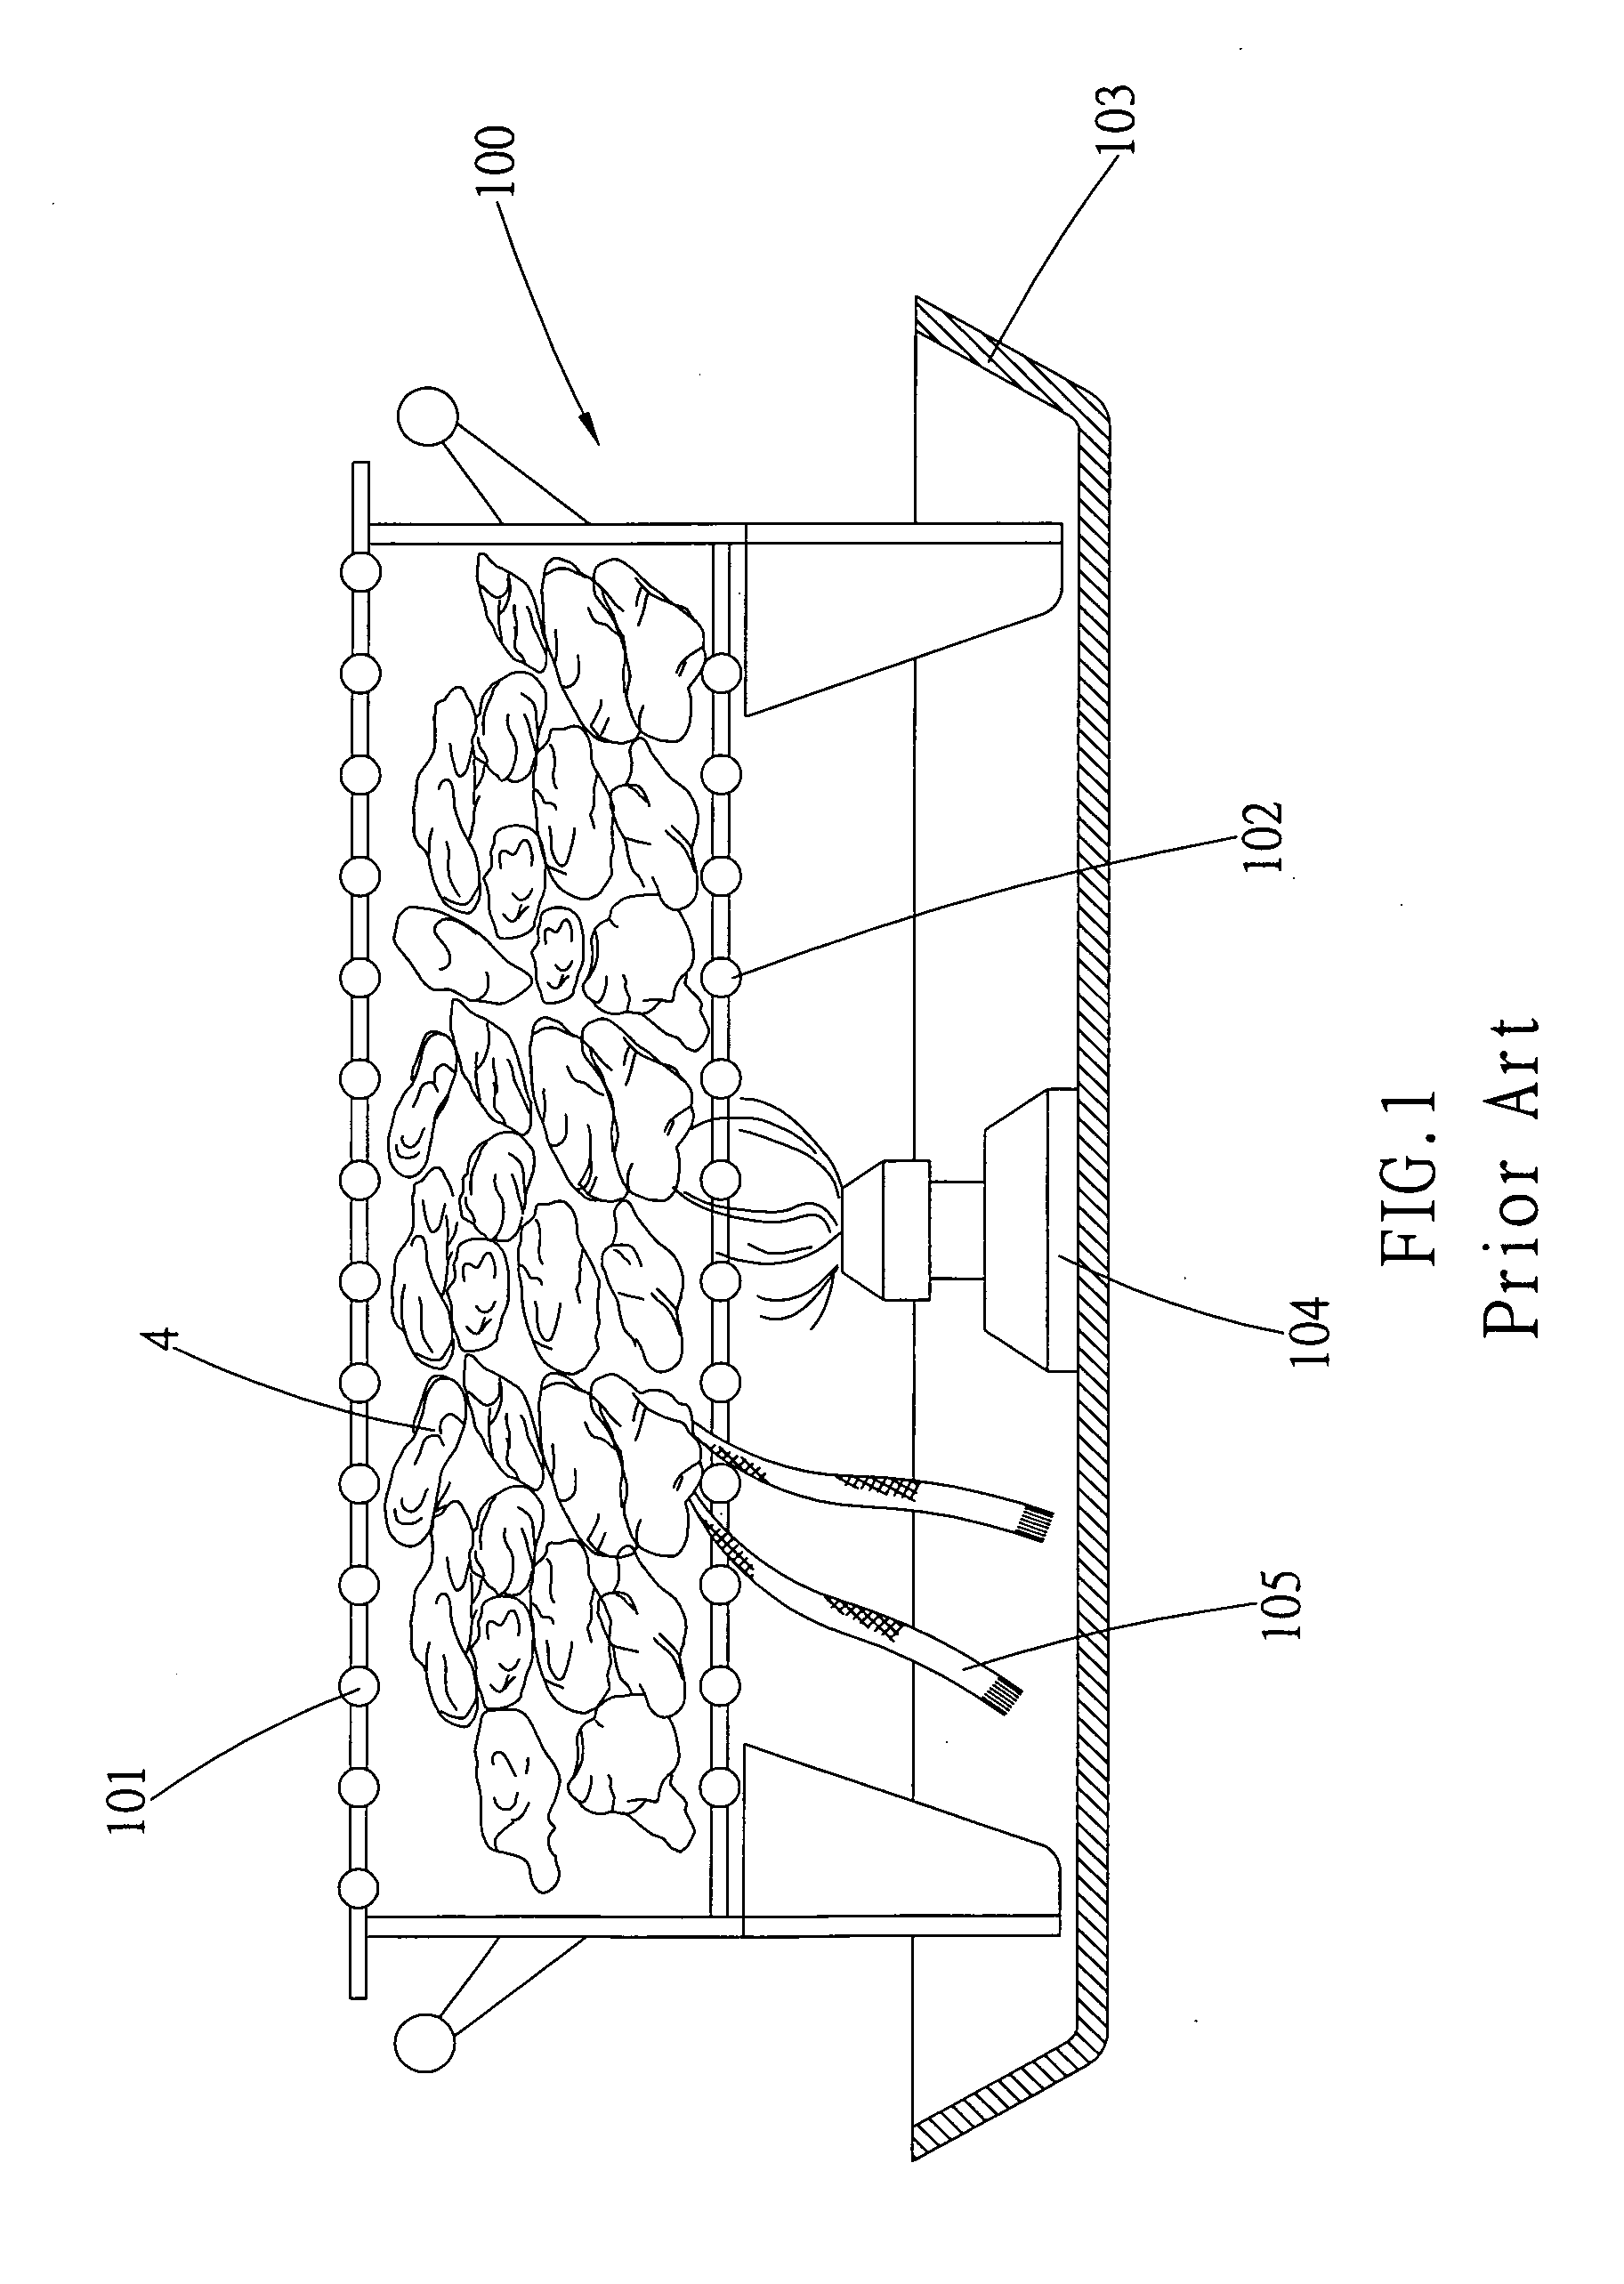 Carbon fuel combustion supporting packaging